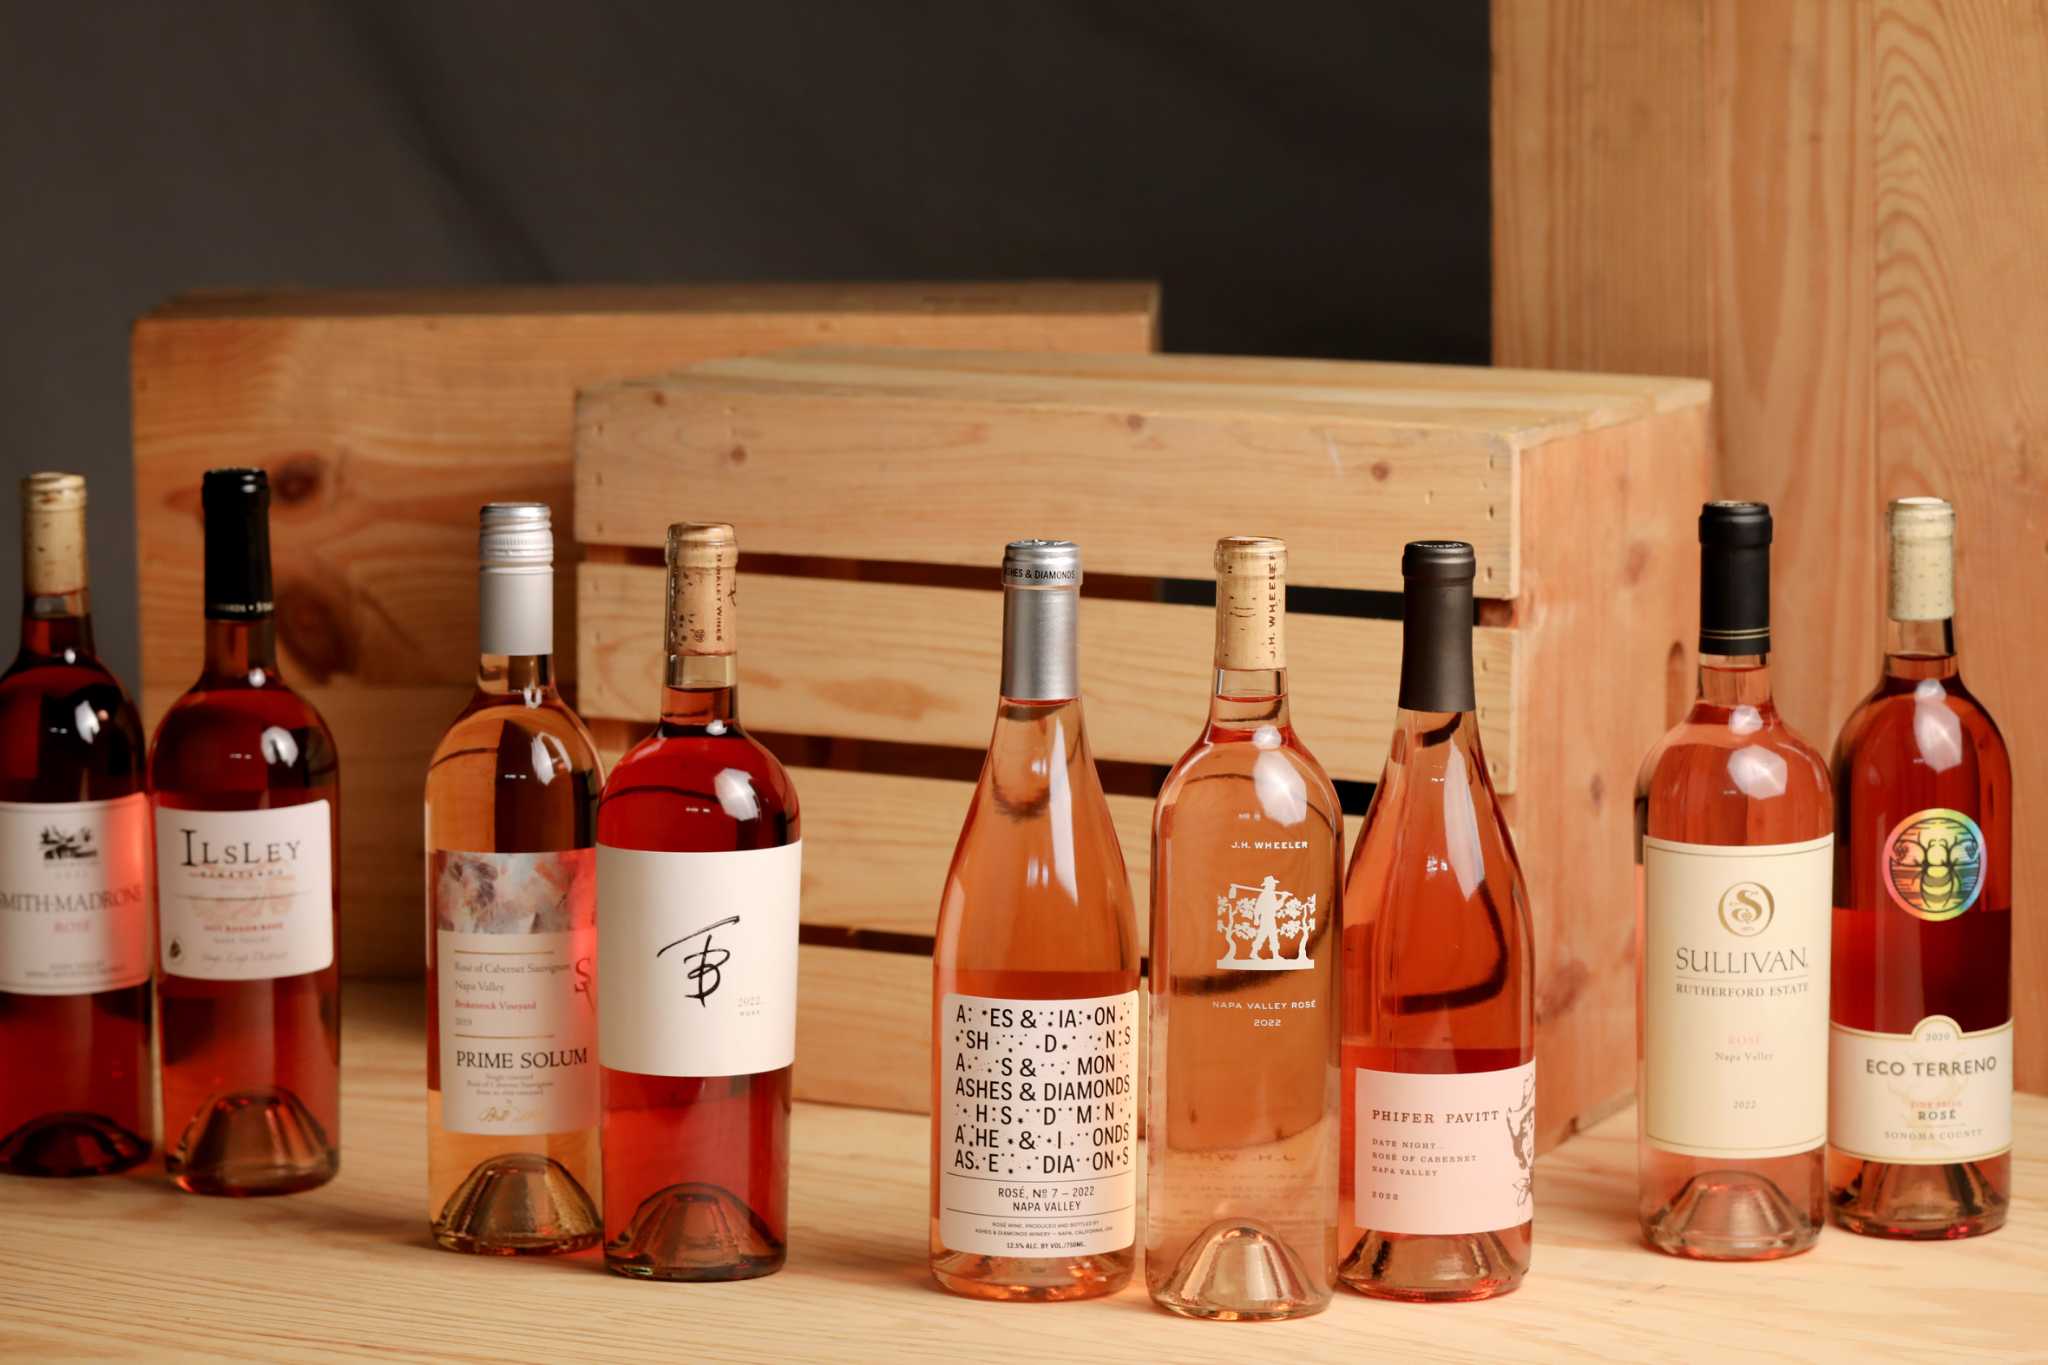 Napa's unusual, expensive rosés sell out 'instantaneously'